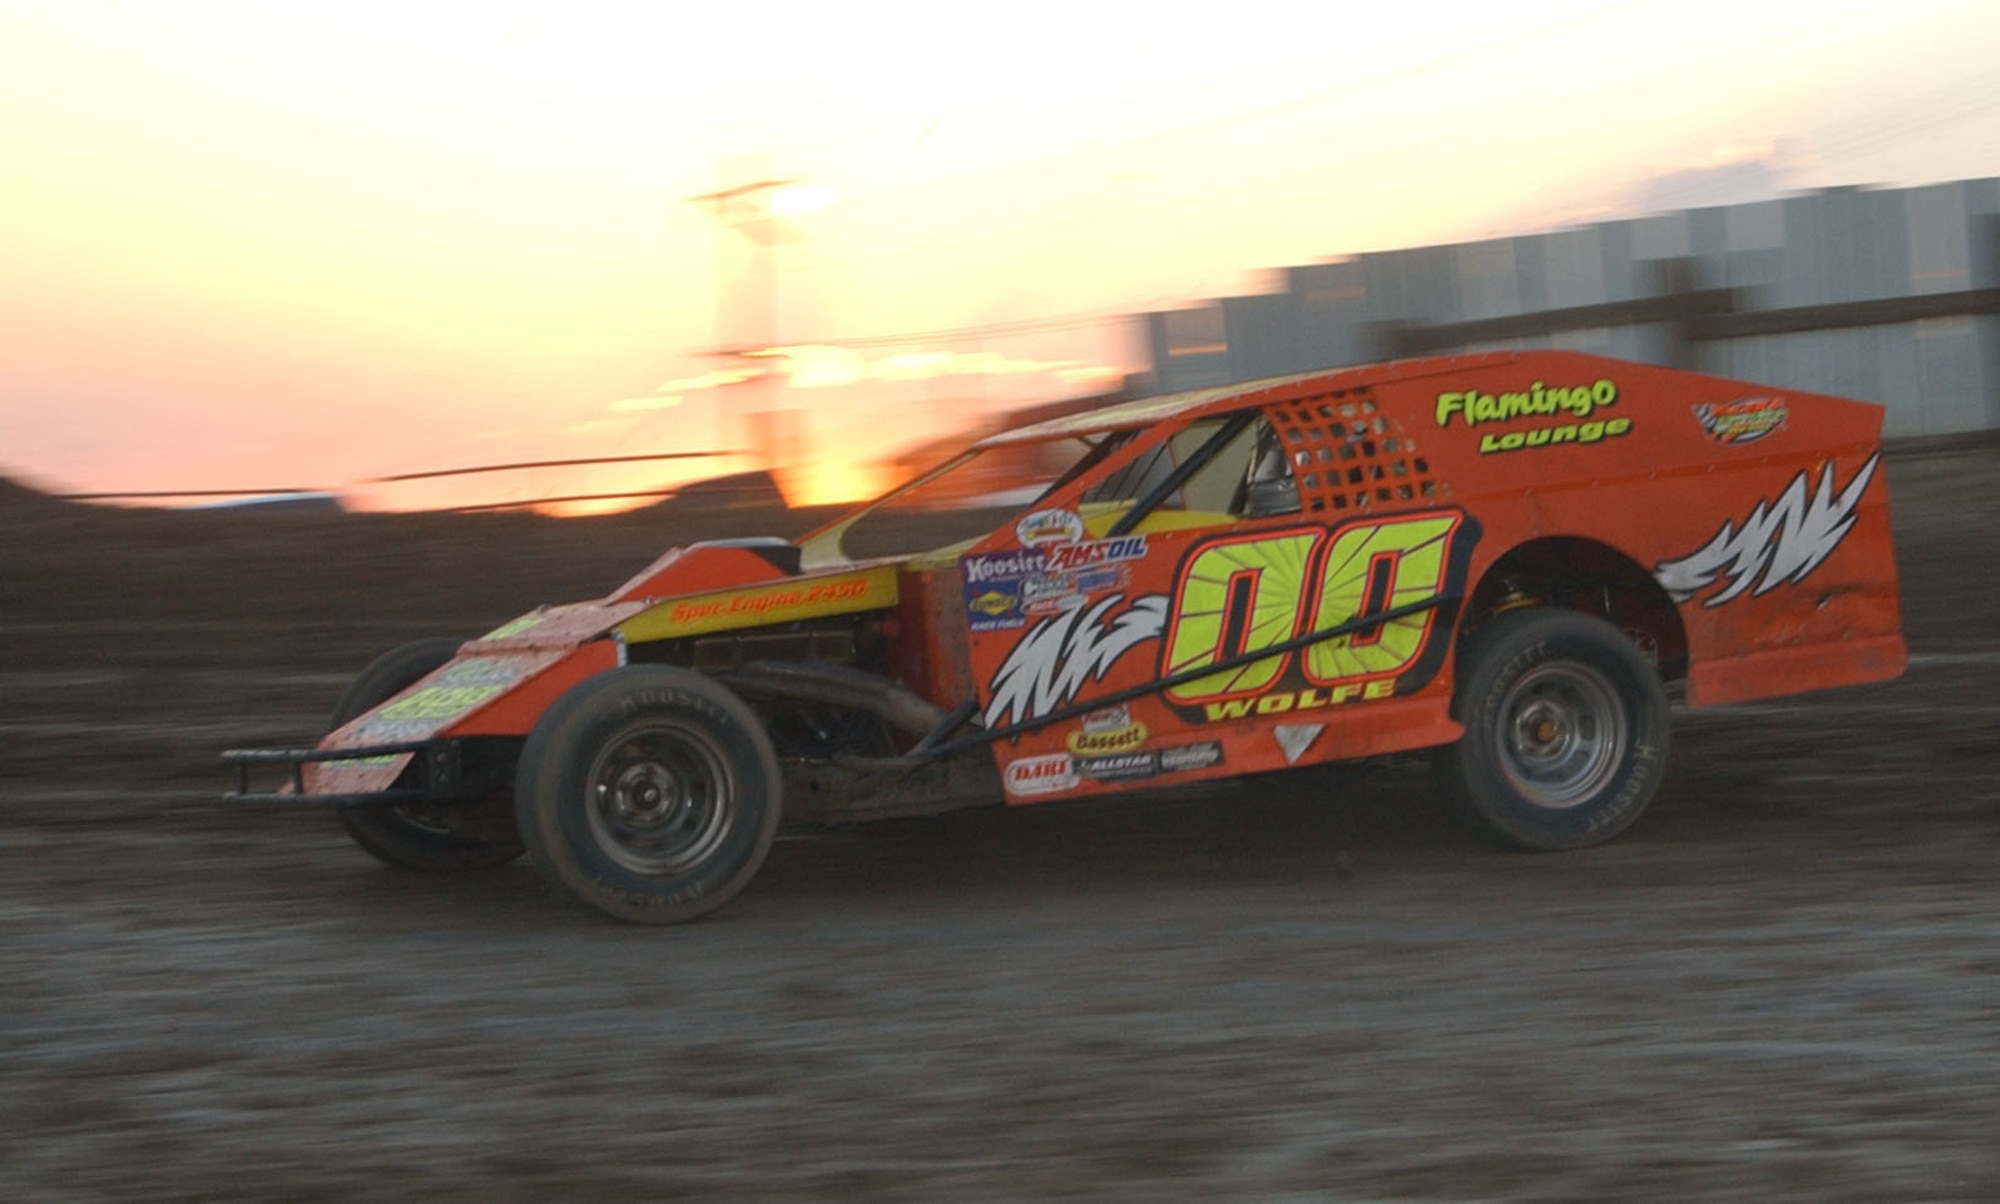 Master Sgt. Russell Wolfe, 341st Logistics Readiness Squadron vehicle fleet manager, races number 00, his modified car at the Electric City Speedway in Great Falls, Mont., July 19. (U.S. Air Force photo/Airman 1st Class Dillon White).